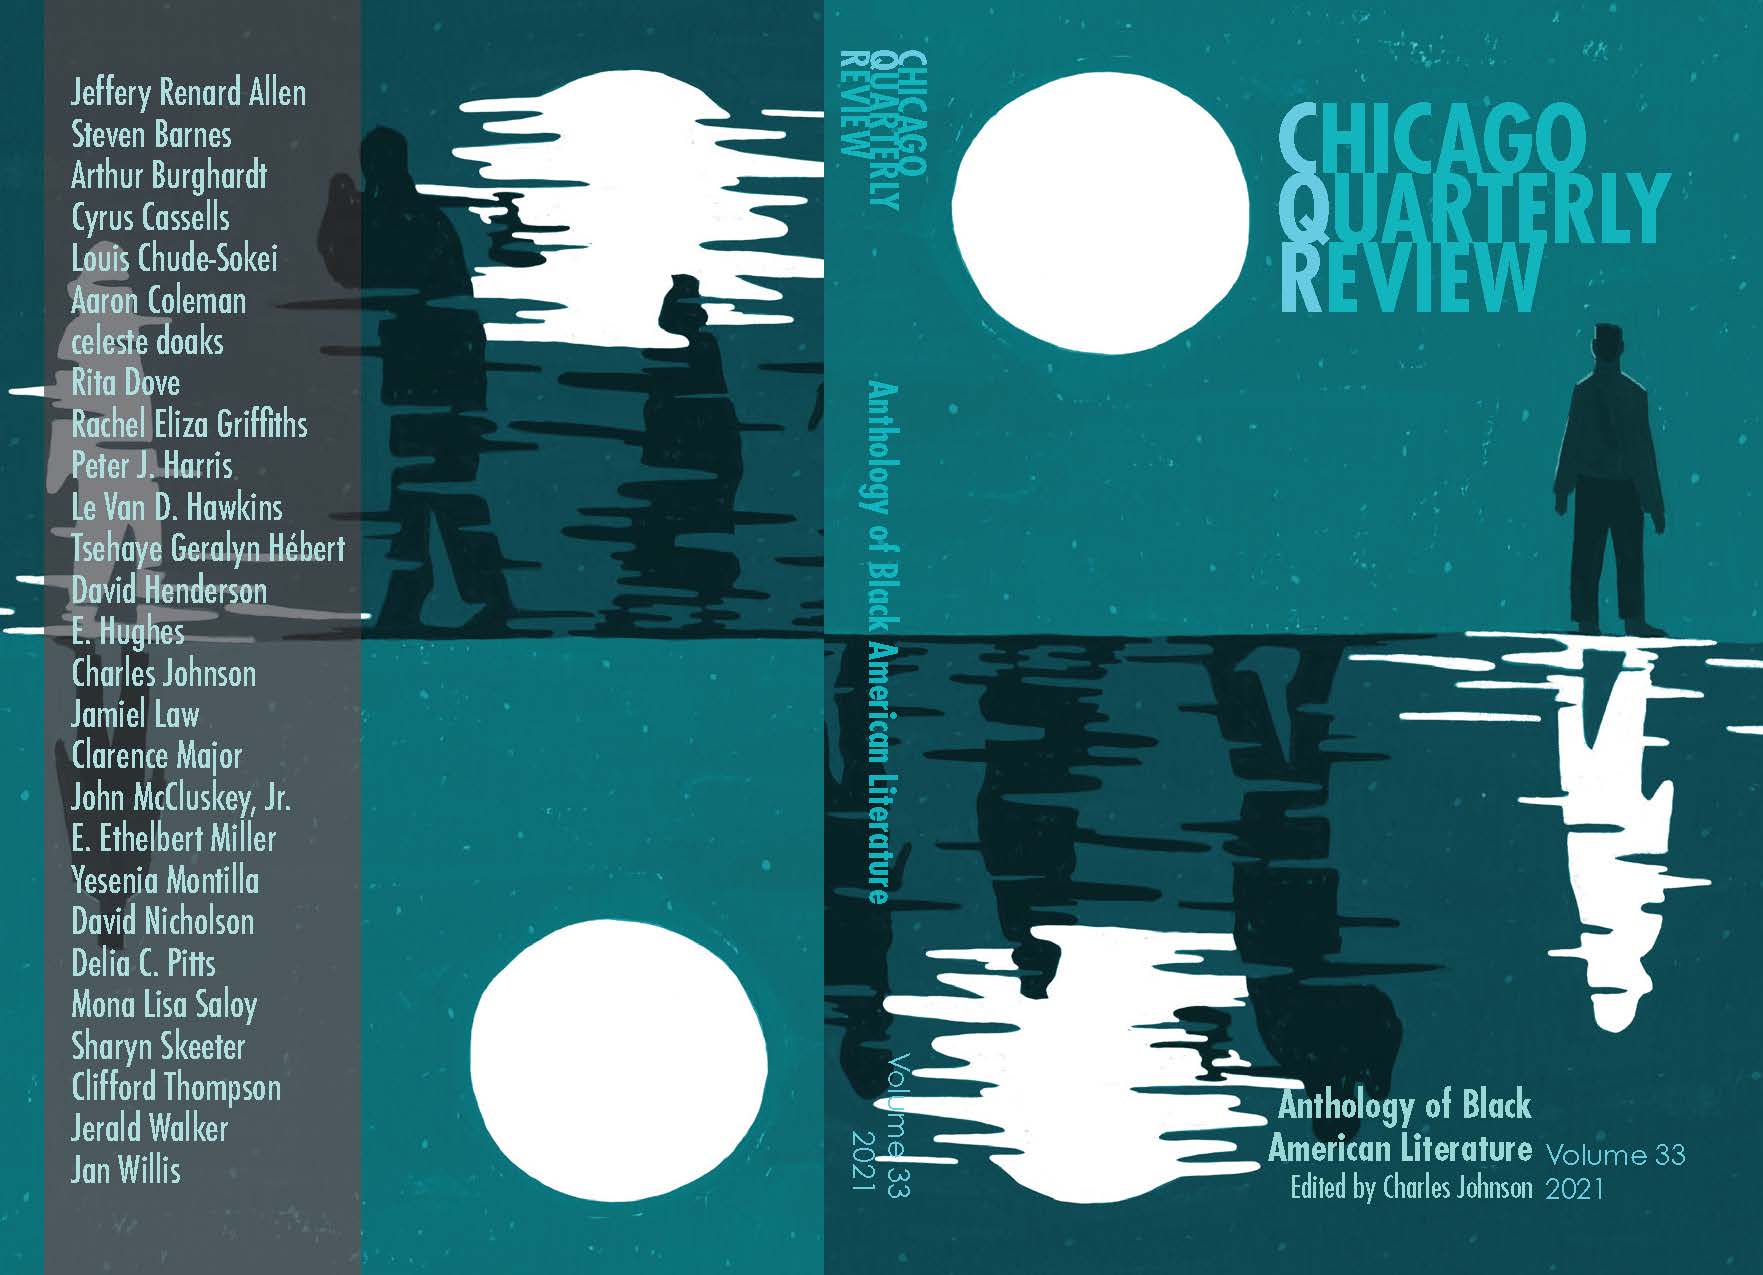 Black American Literature Issue. Photos Courtesy Chicago Quarterly Review